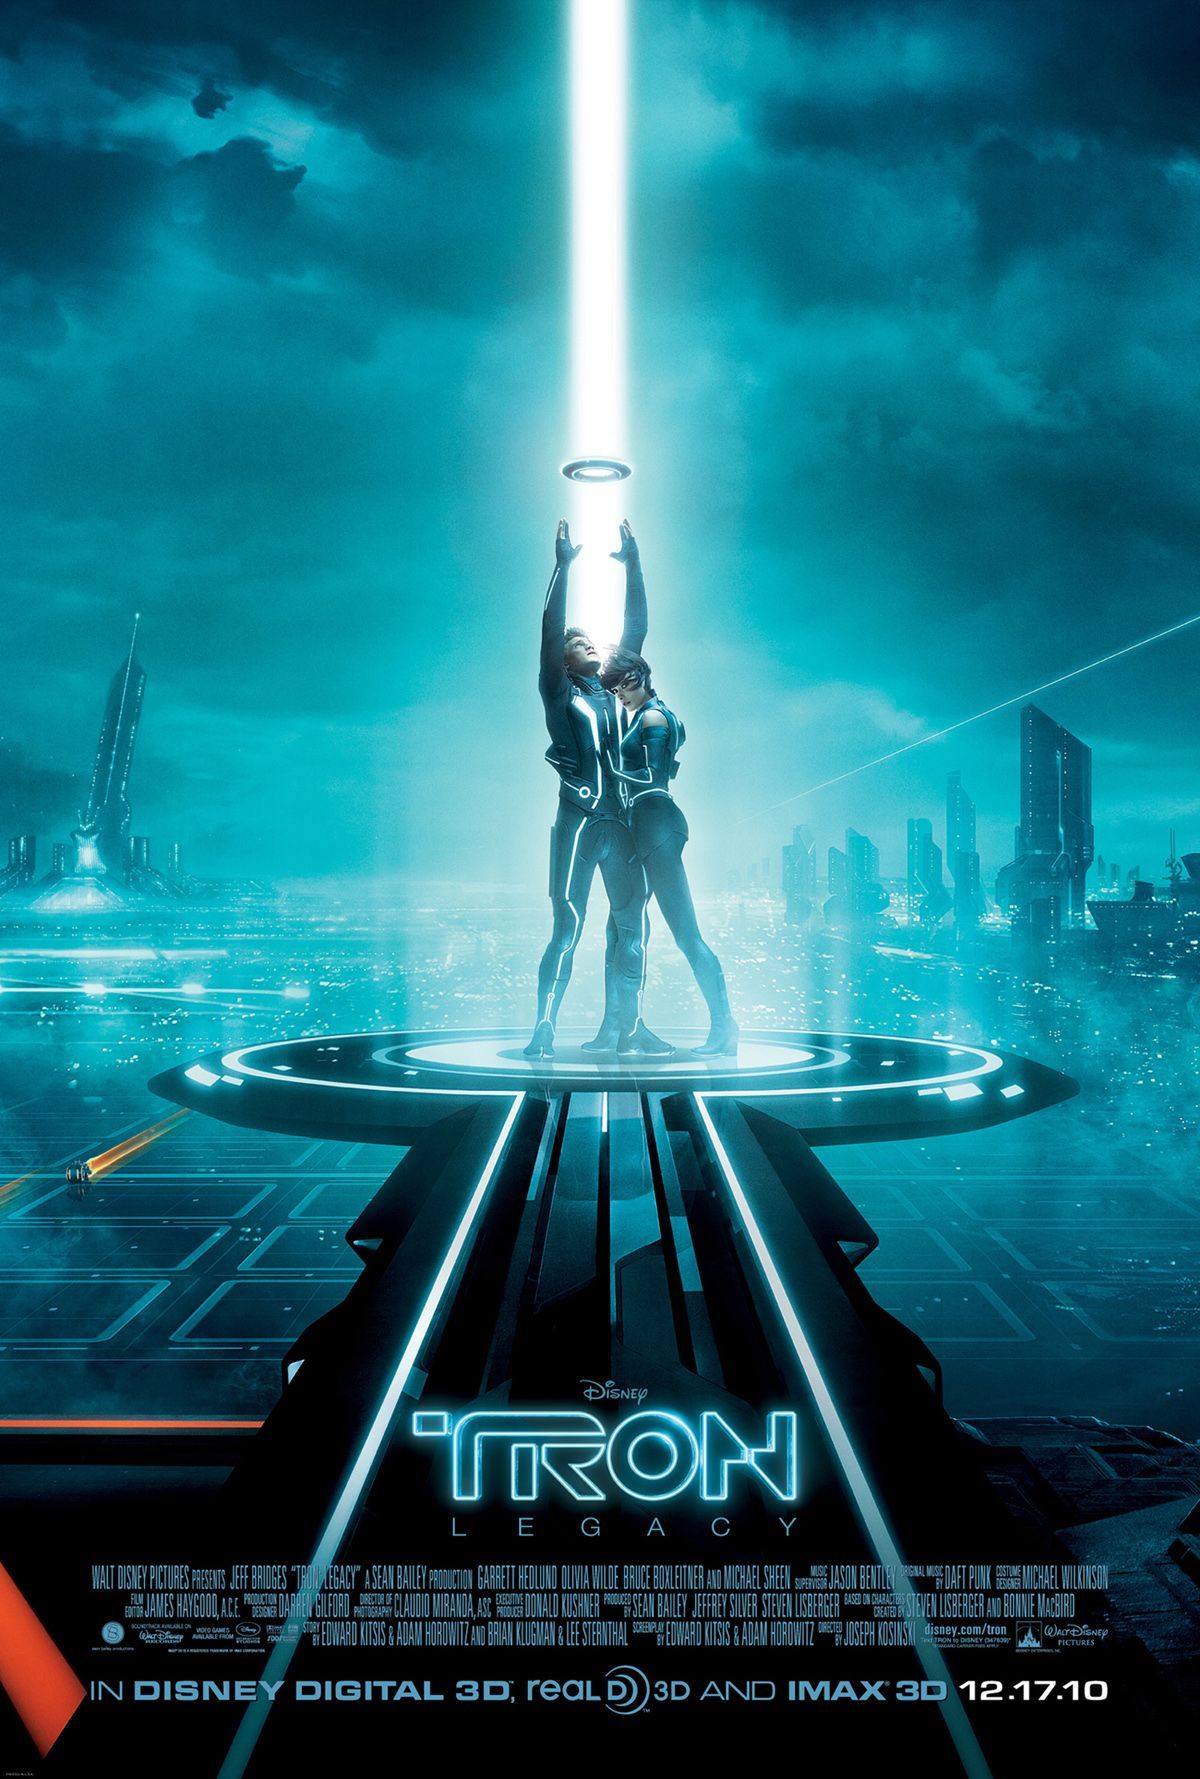 The New Tron: Legacy Poster Looks Awfully Familiar. Tron legacy, Sci fi movies, Movie wallpaper